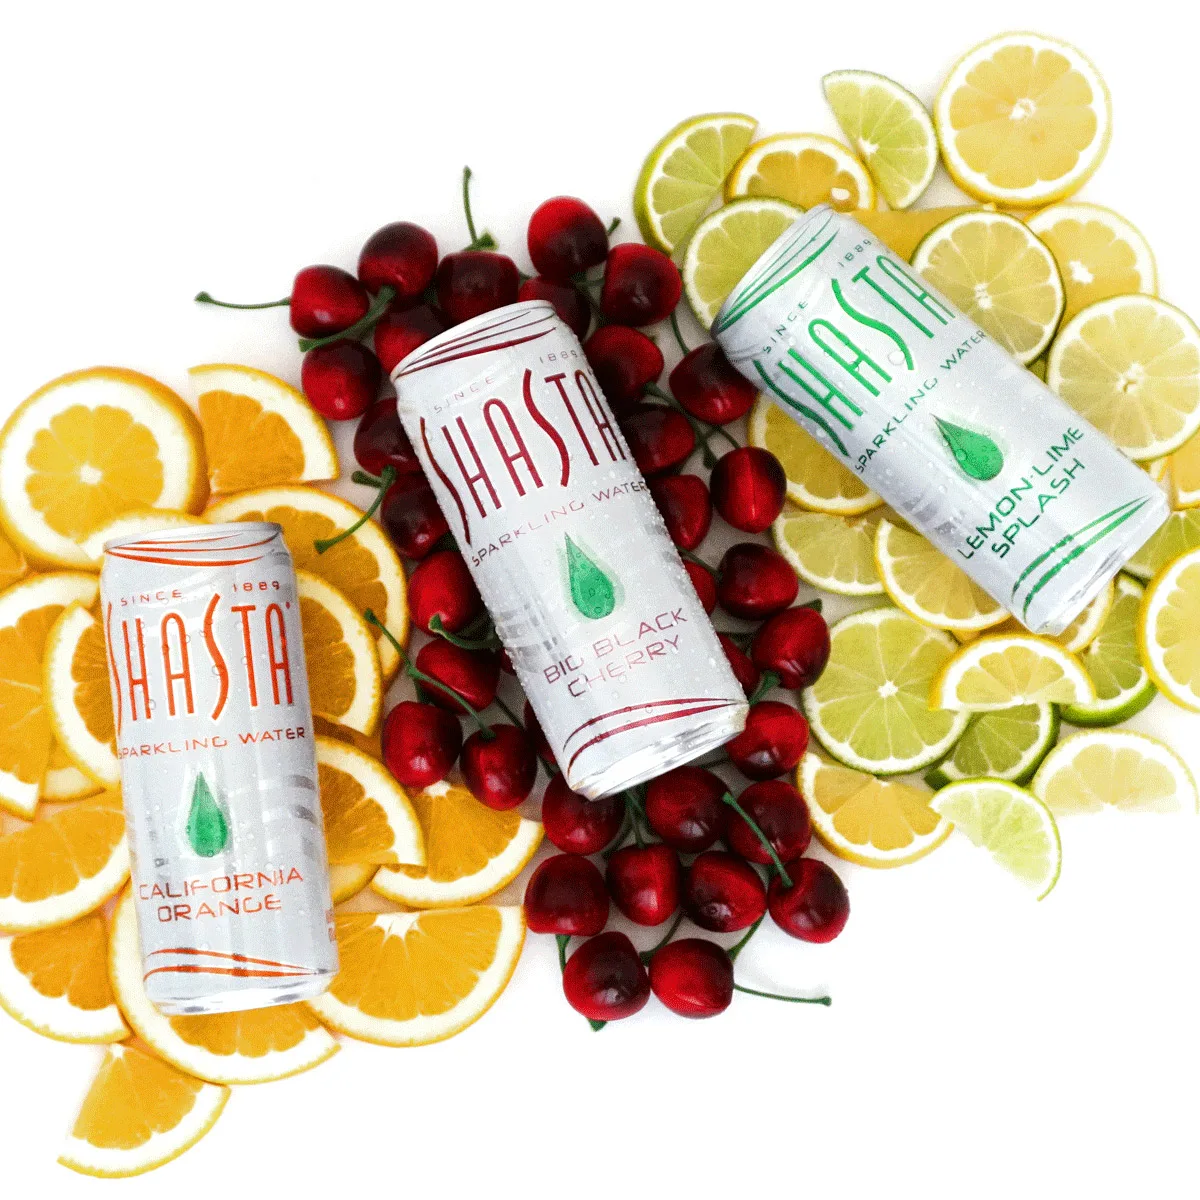 Shasta sparkling water cans laying on fruit